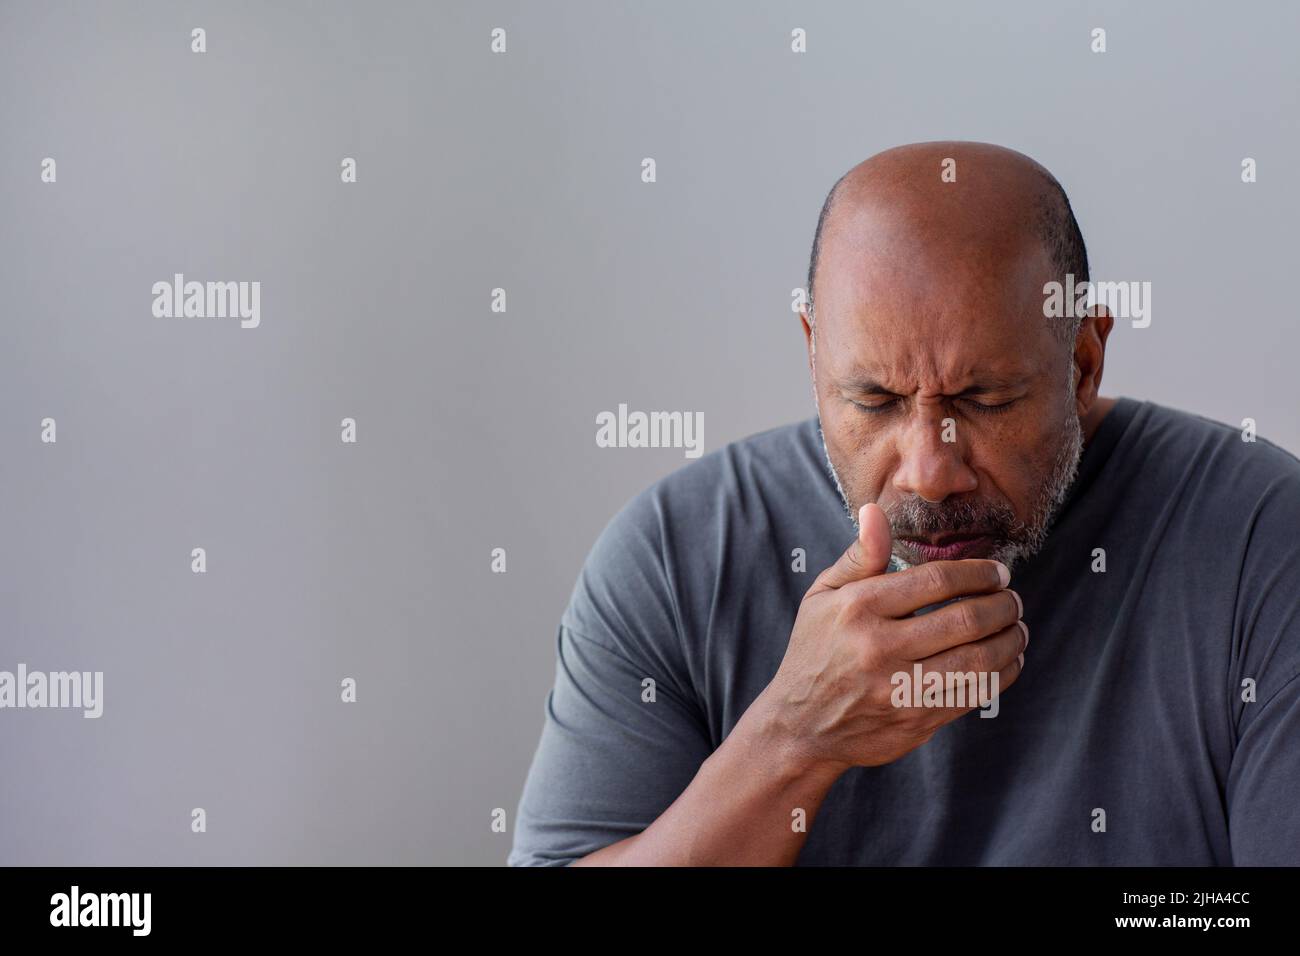 Older African American man not feeling well. Stock Photo